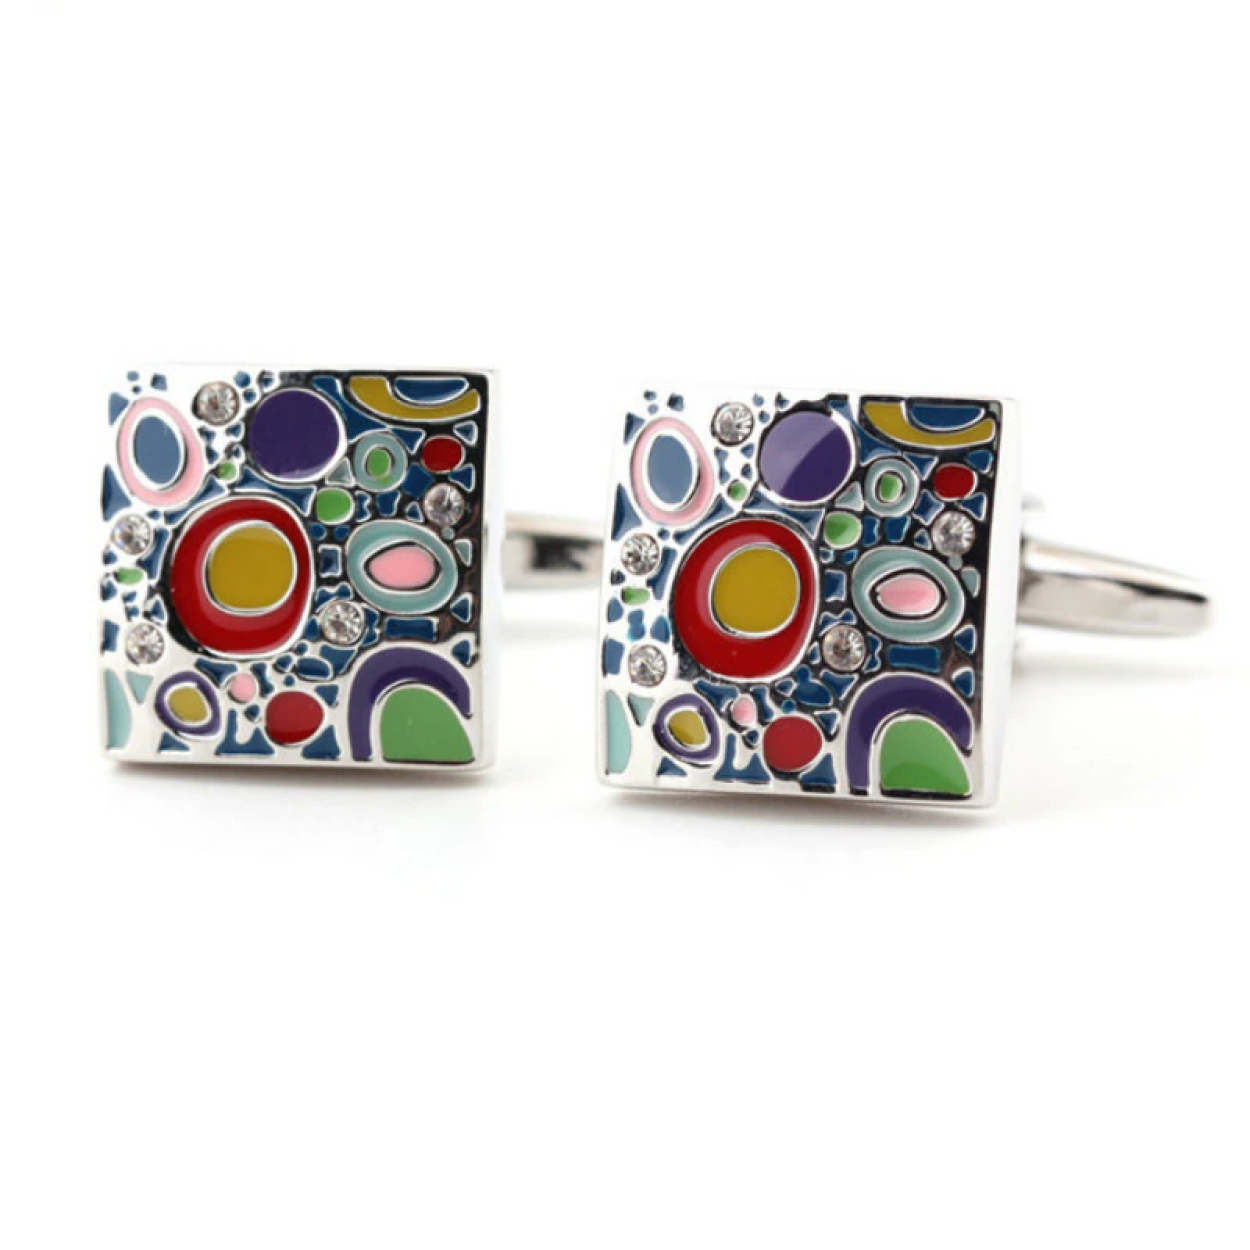 Chrome with Multiple Colorful Circles Cufflinks